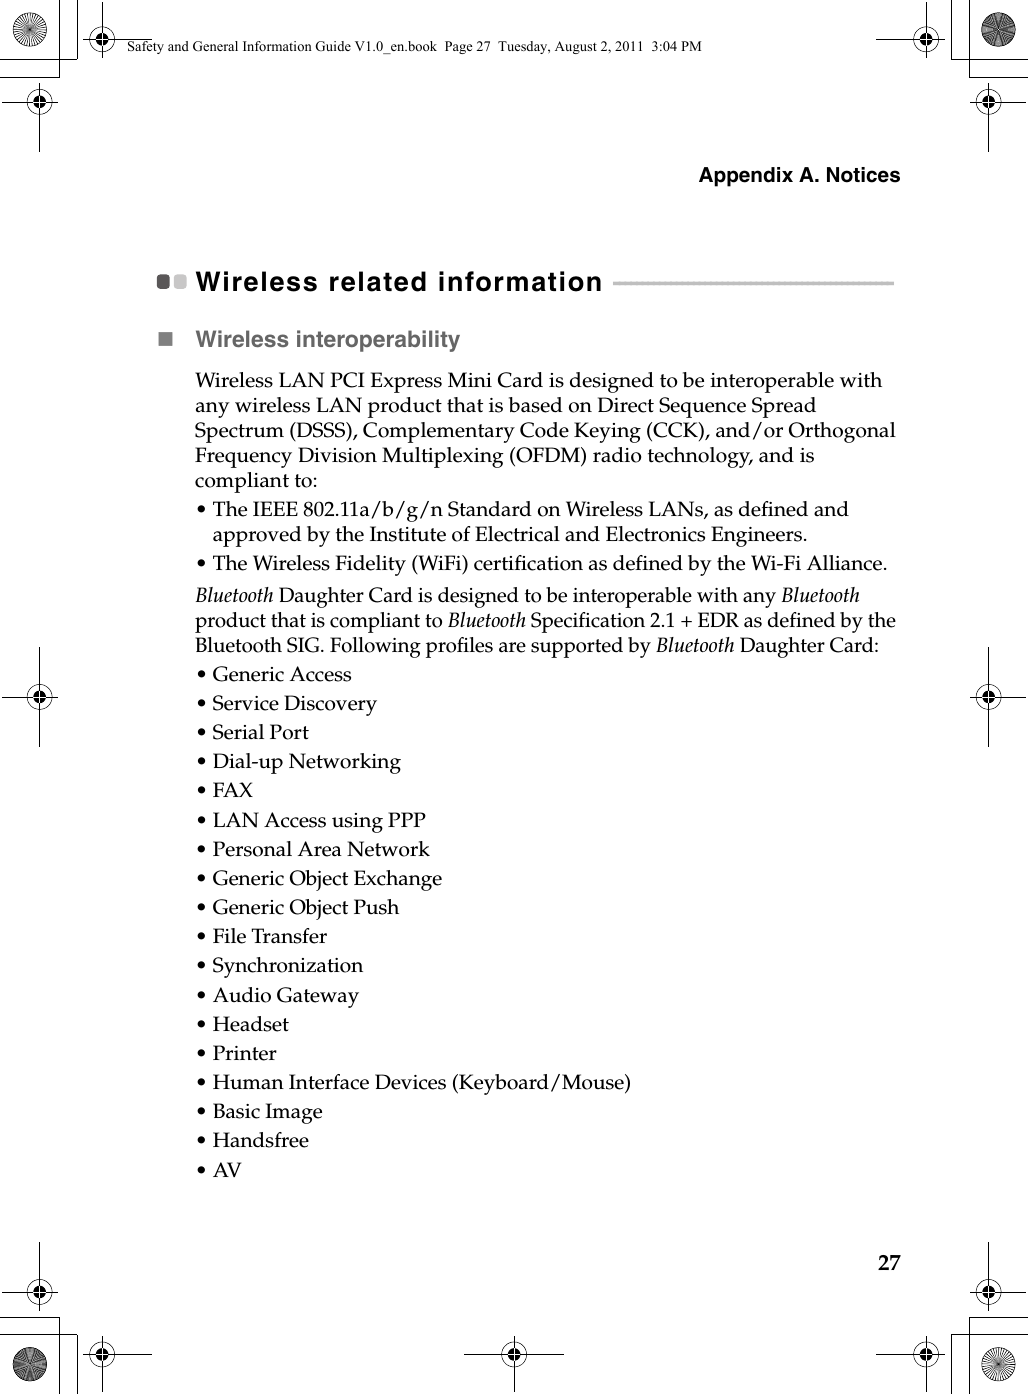 Appendix A. Notices27Wireless related information  - - - - - - - - - - - - - - - - - - - - - - - - - - - - - - - - - - - - - - - - - - - - - - - - - Wireless interoperabilityWireless LAN PCI Express Mini Card is designed to be interoperable with any wireless LAN product that is based on Direct Sequence Spread Spectrum (DSSS), Complementary Code Keying (CCK), and/or Orthogonal Frequency Division Multiplexing (OFDM) radio technology,  and is compliant to:•The IEEE 802.11a/b/g/n Standard on Wireless LANs, as defined and approved by the Institute of Electrical and Electronics Engineers.•The Wireless Fidelity (WiFi) certification as defined by the Wi-Fi Alliance.Bluetooth Daughter Card is designed to be interoperable with any Bluetooth product that is compliant to Bluetooth Specification 2.1 + EDR as defined by the Bluetooth SIG. Following profiles are supported by Bluetooth Daughter Card:•Generic Access•Service Discovery•Serial Port•Dial-up Networking•FAX • LAN Access using PPP•Personal Area Network •Generic Object Exchange•Generic Object Push•File Transfer•Synchronization•Audio Gateway•Headset •Printer•Human Interface Devices (Keyboard/Mouse)•Basic Image•Handsfree•AVSafety and General Information Guide V1.0_en.book  Page 27  Tuesday, August 2, 2011  3:04 PM